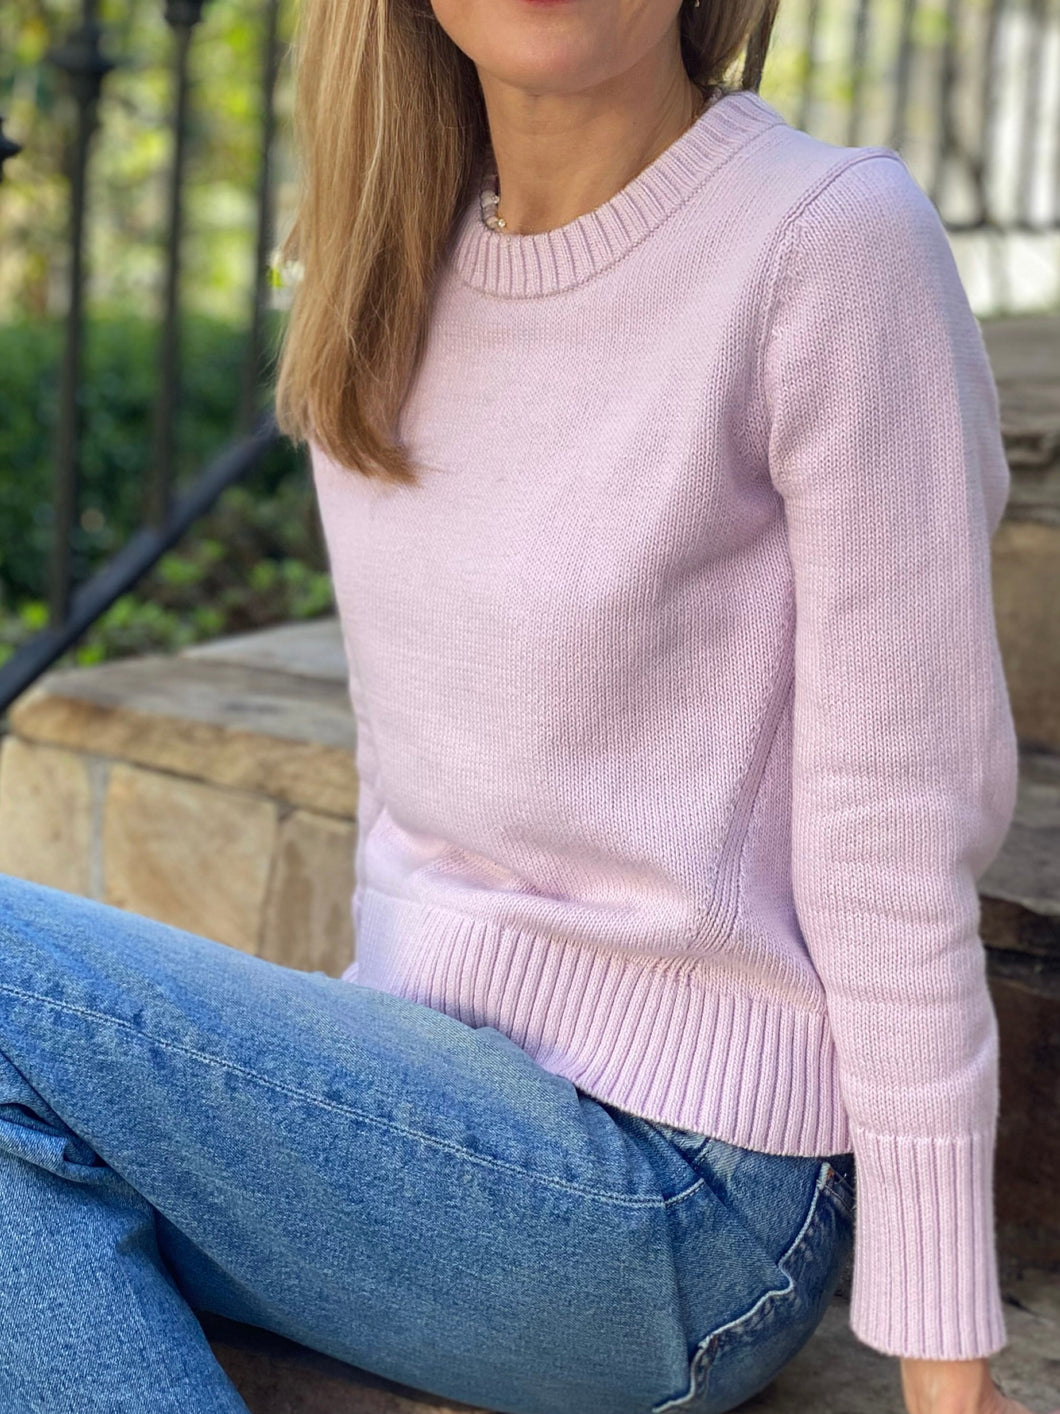 The Castine Cotton Sweater in Pale Orchid